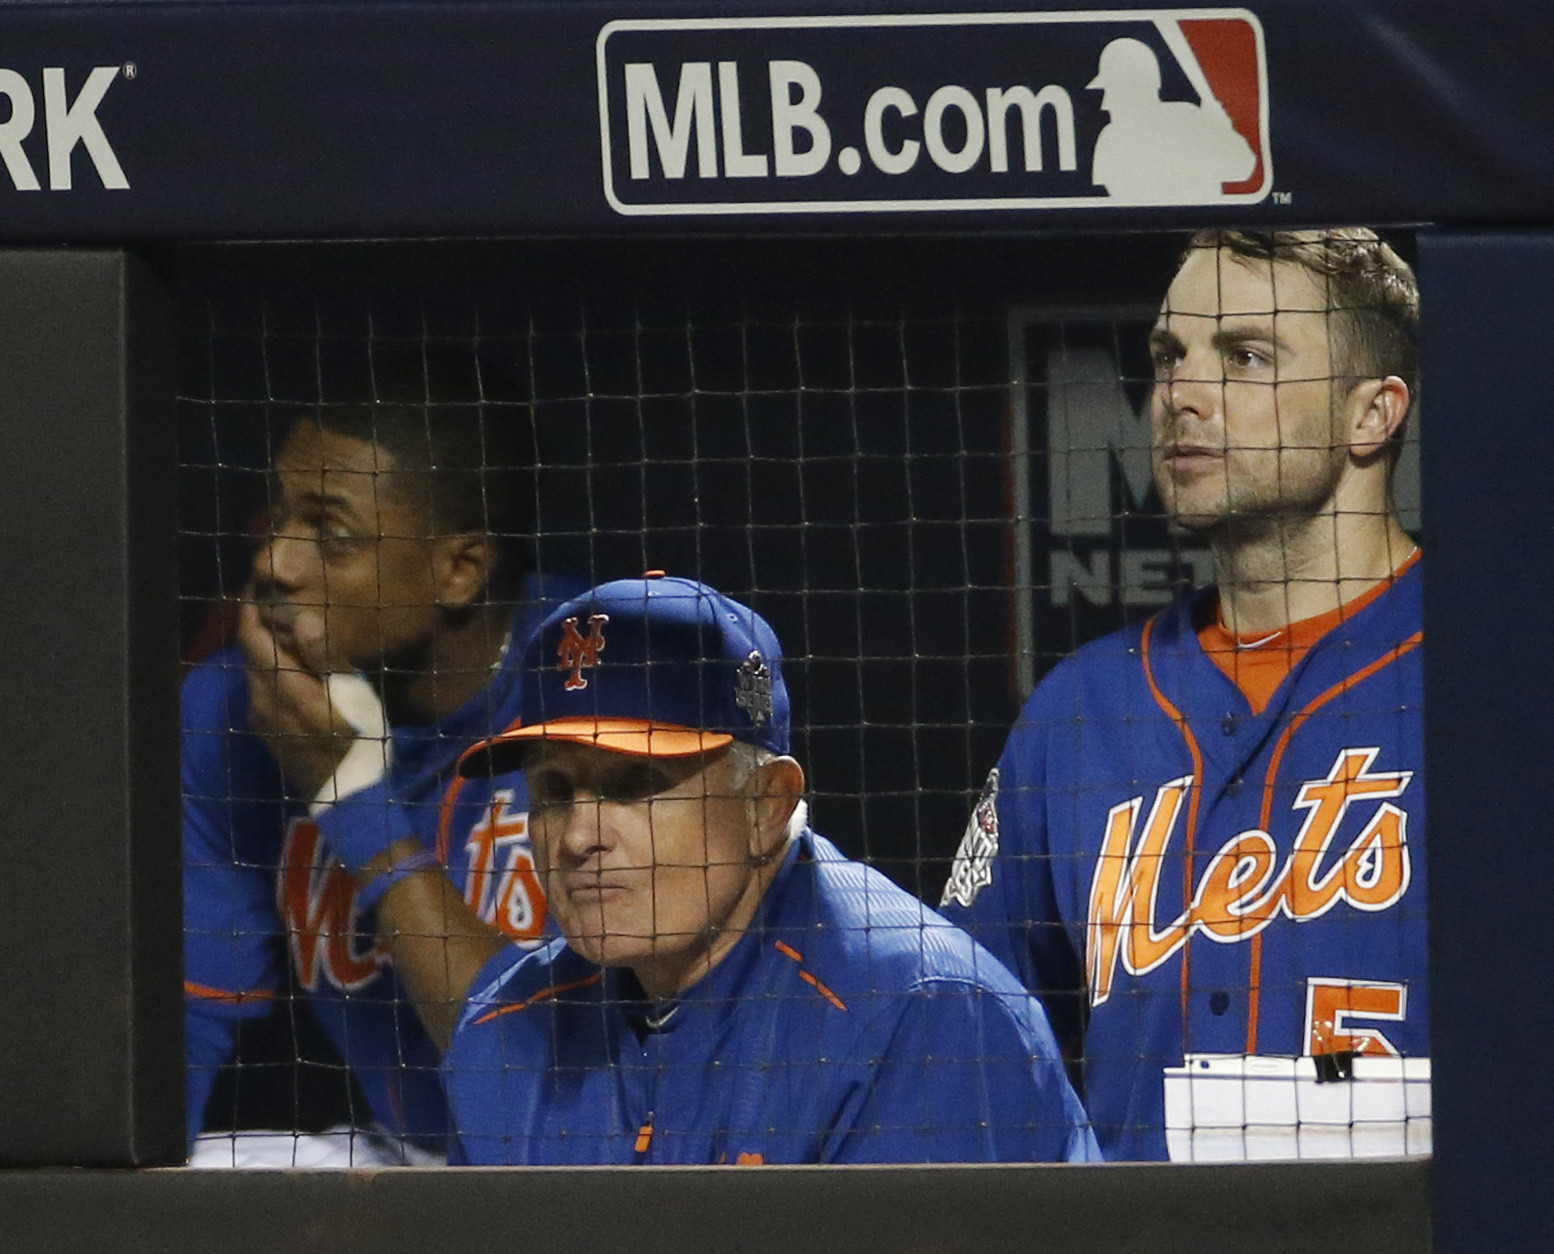 New York Mets manager Terry Collins watches with David Wright, right, the 11th inning of Game 5 of the Major League Baseball World Series against the Kansas City Royals Sunday, Nov. 1, 2015, in New York. (AP Photo/Matt Slocum)